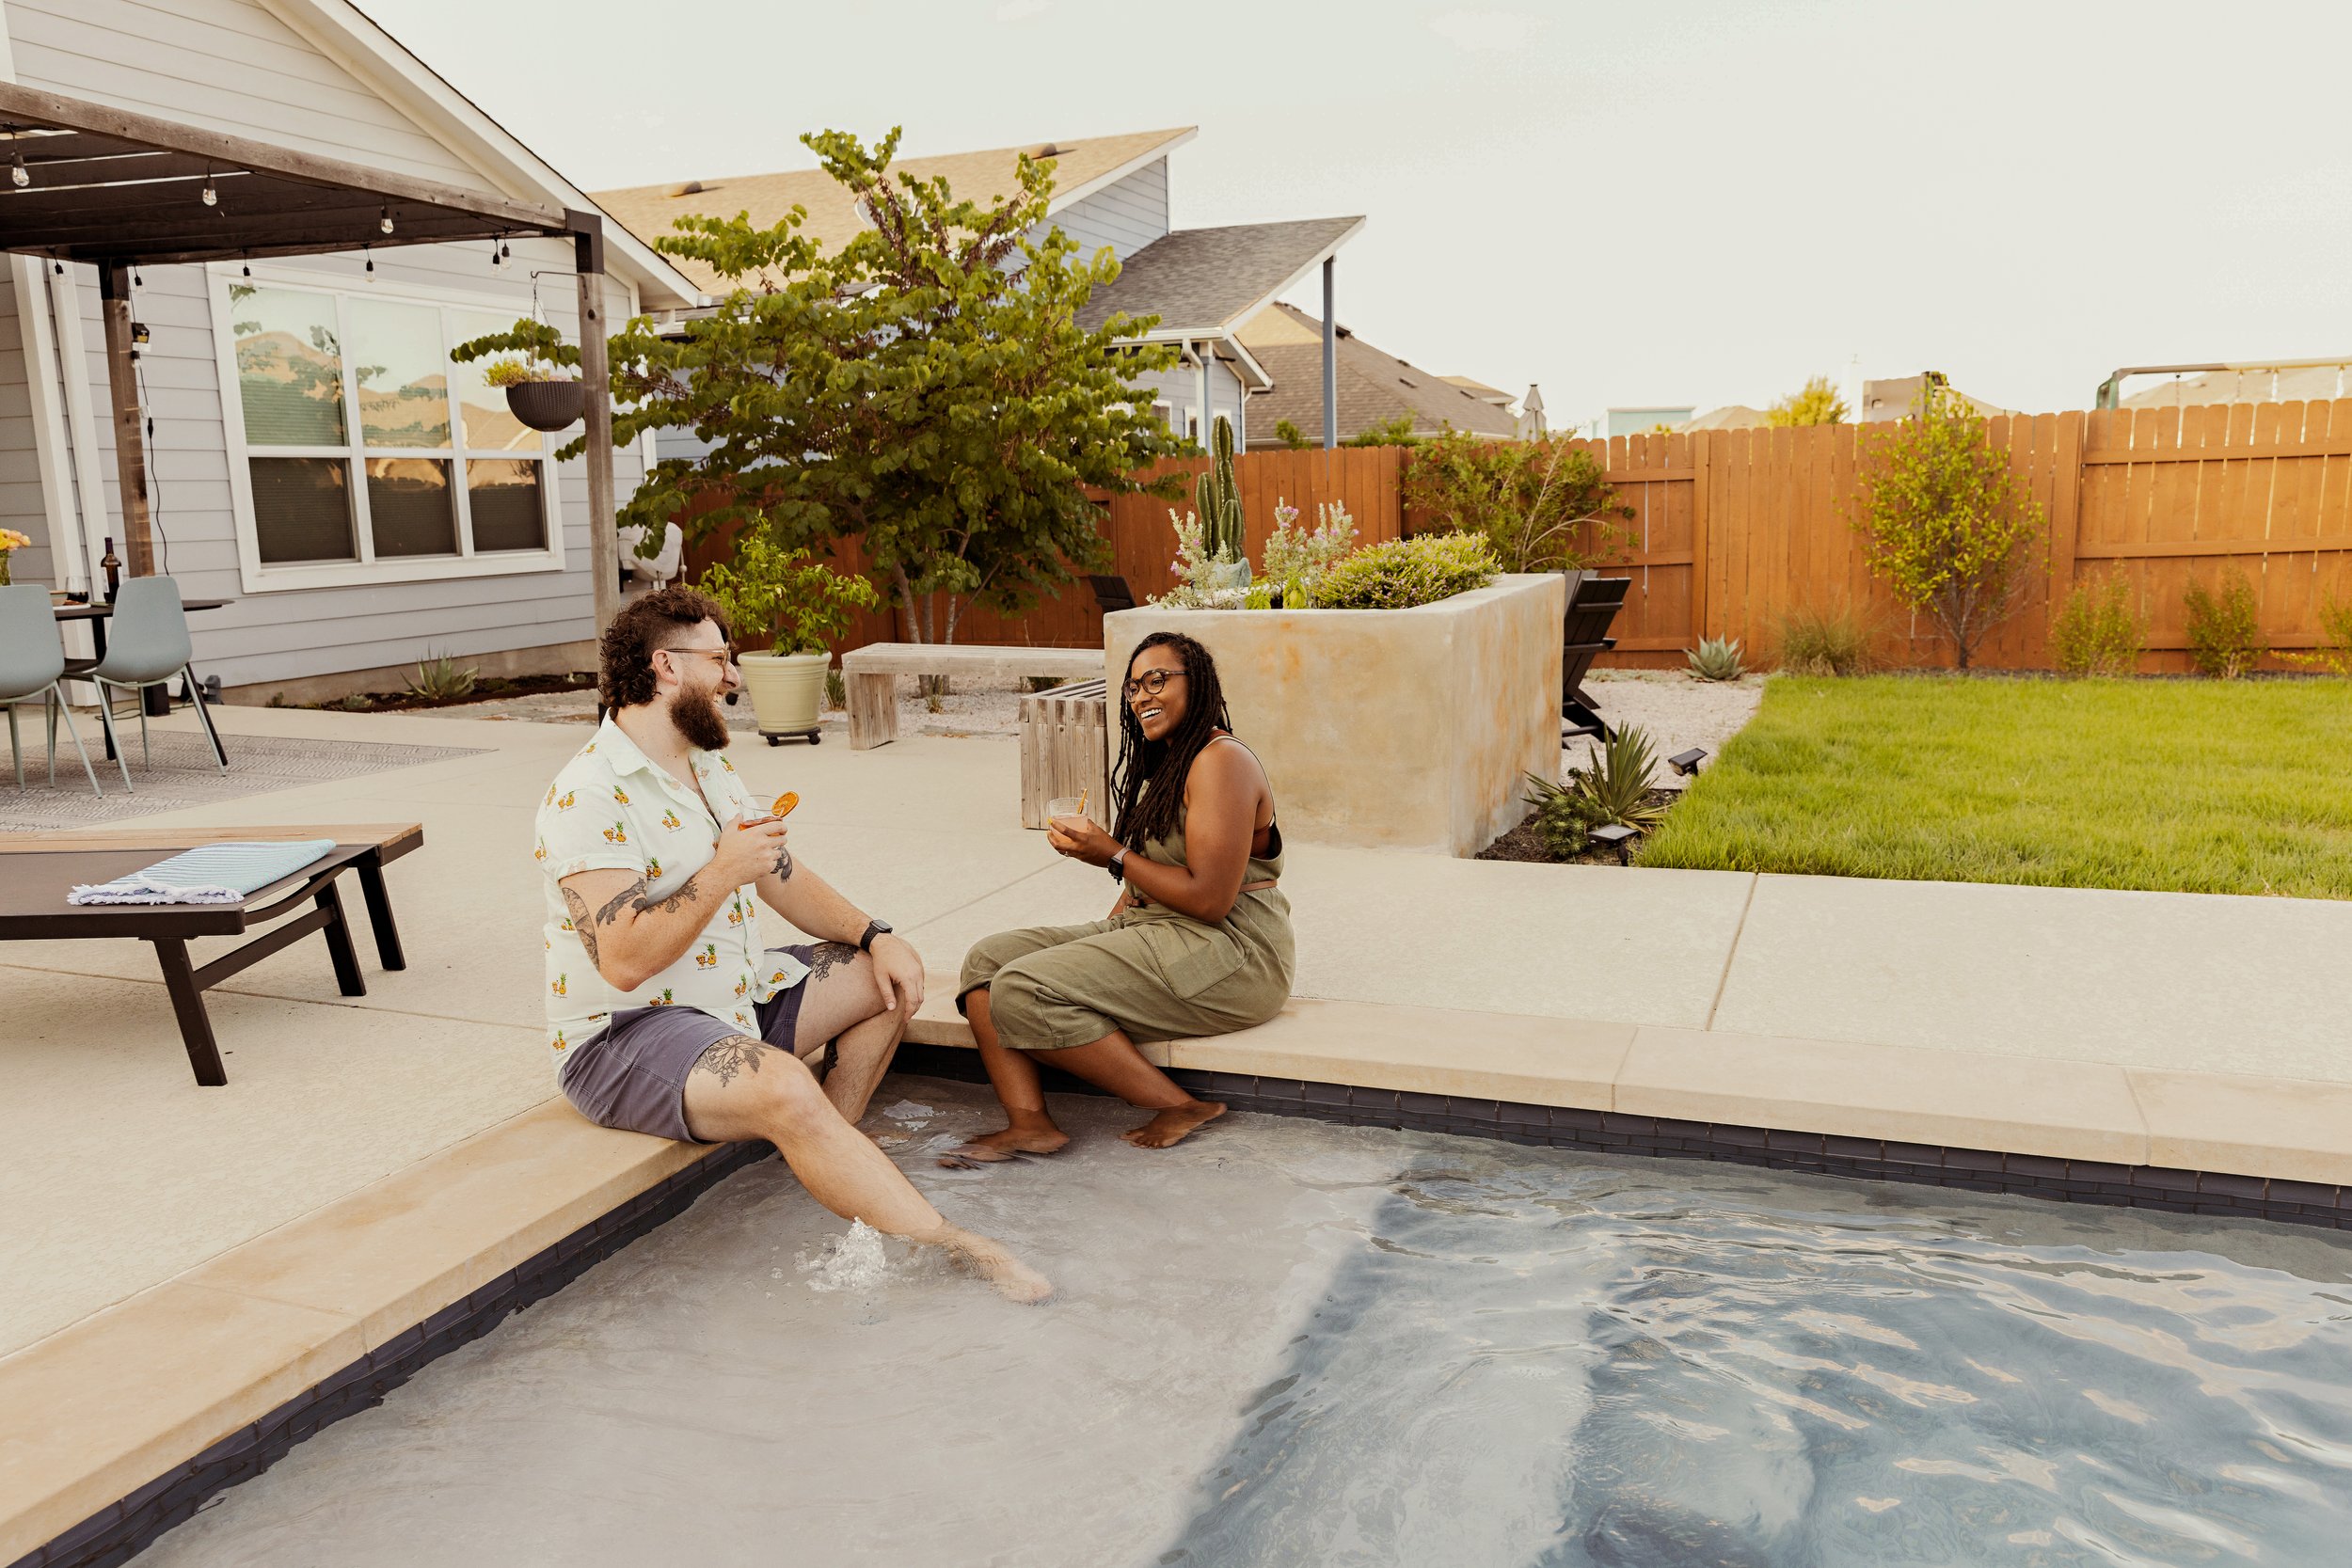 Fenced house, couple relaxing on pool side, tall grass, plants, outdoor chairs, lightings.